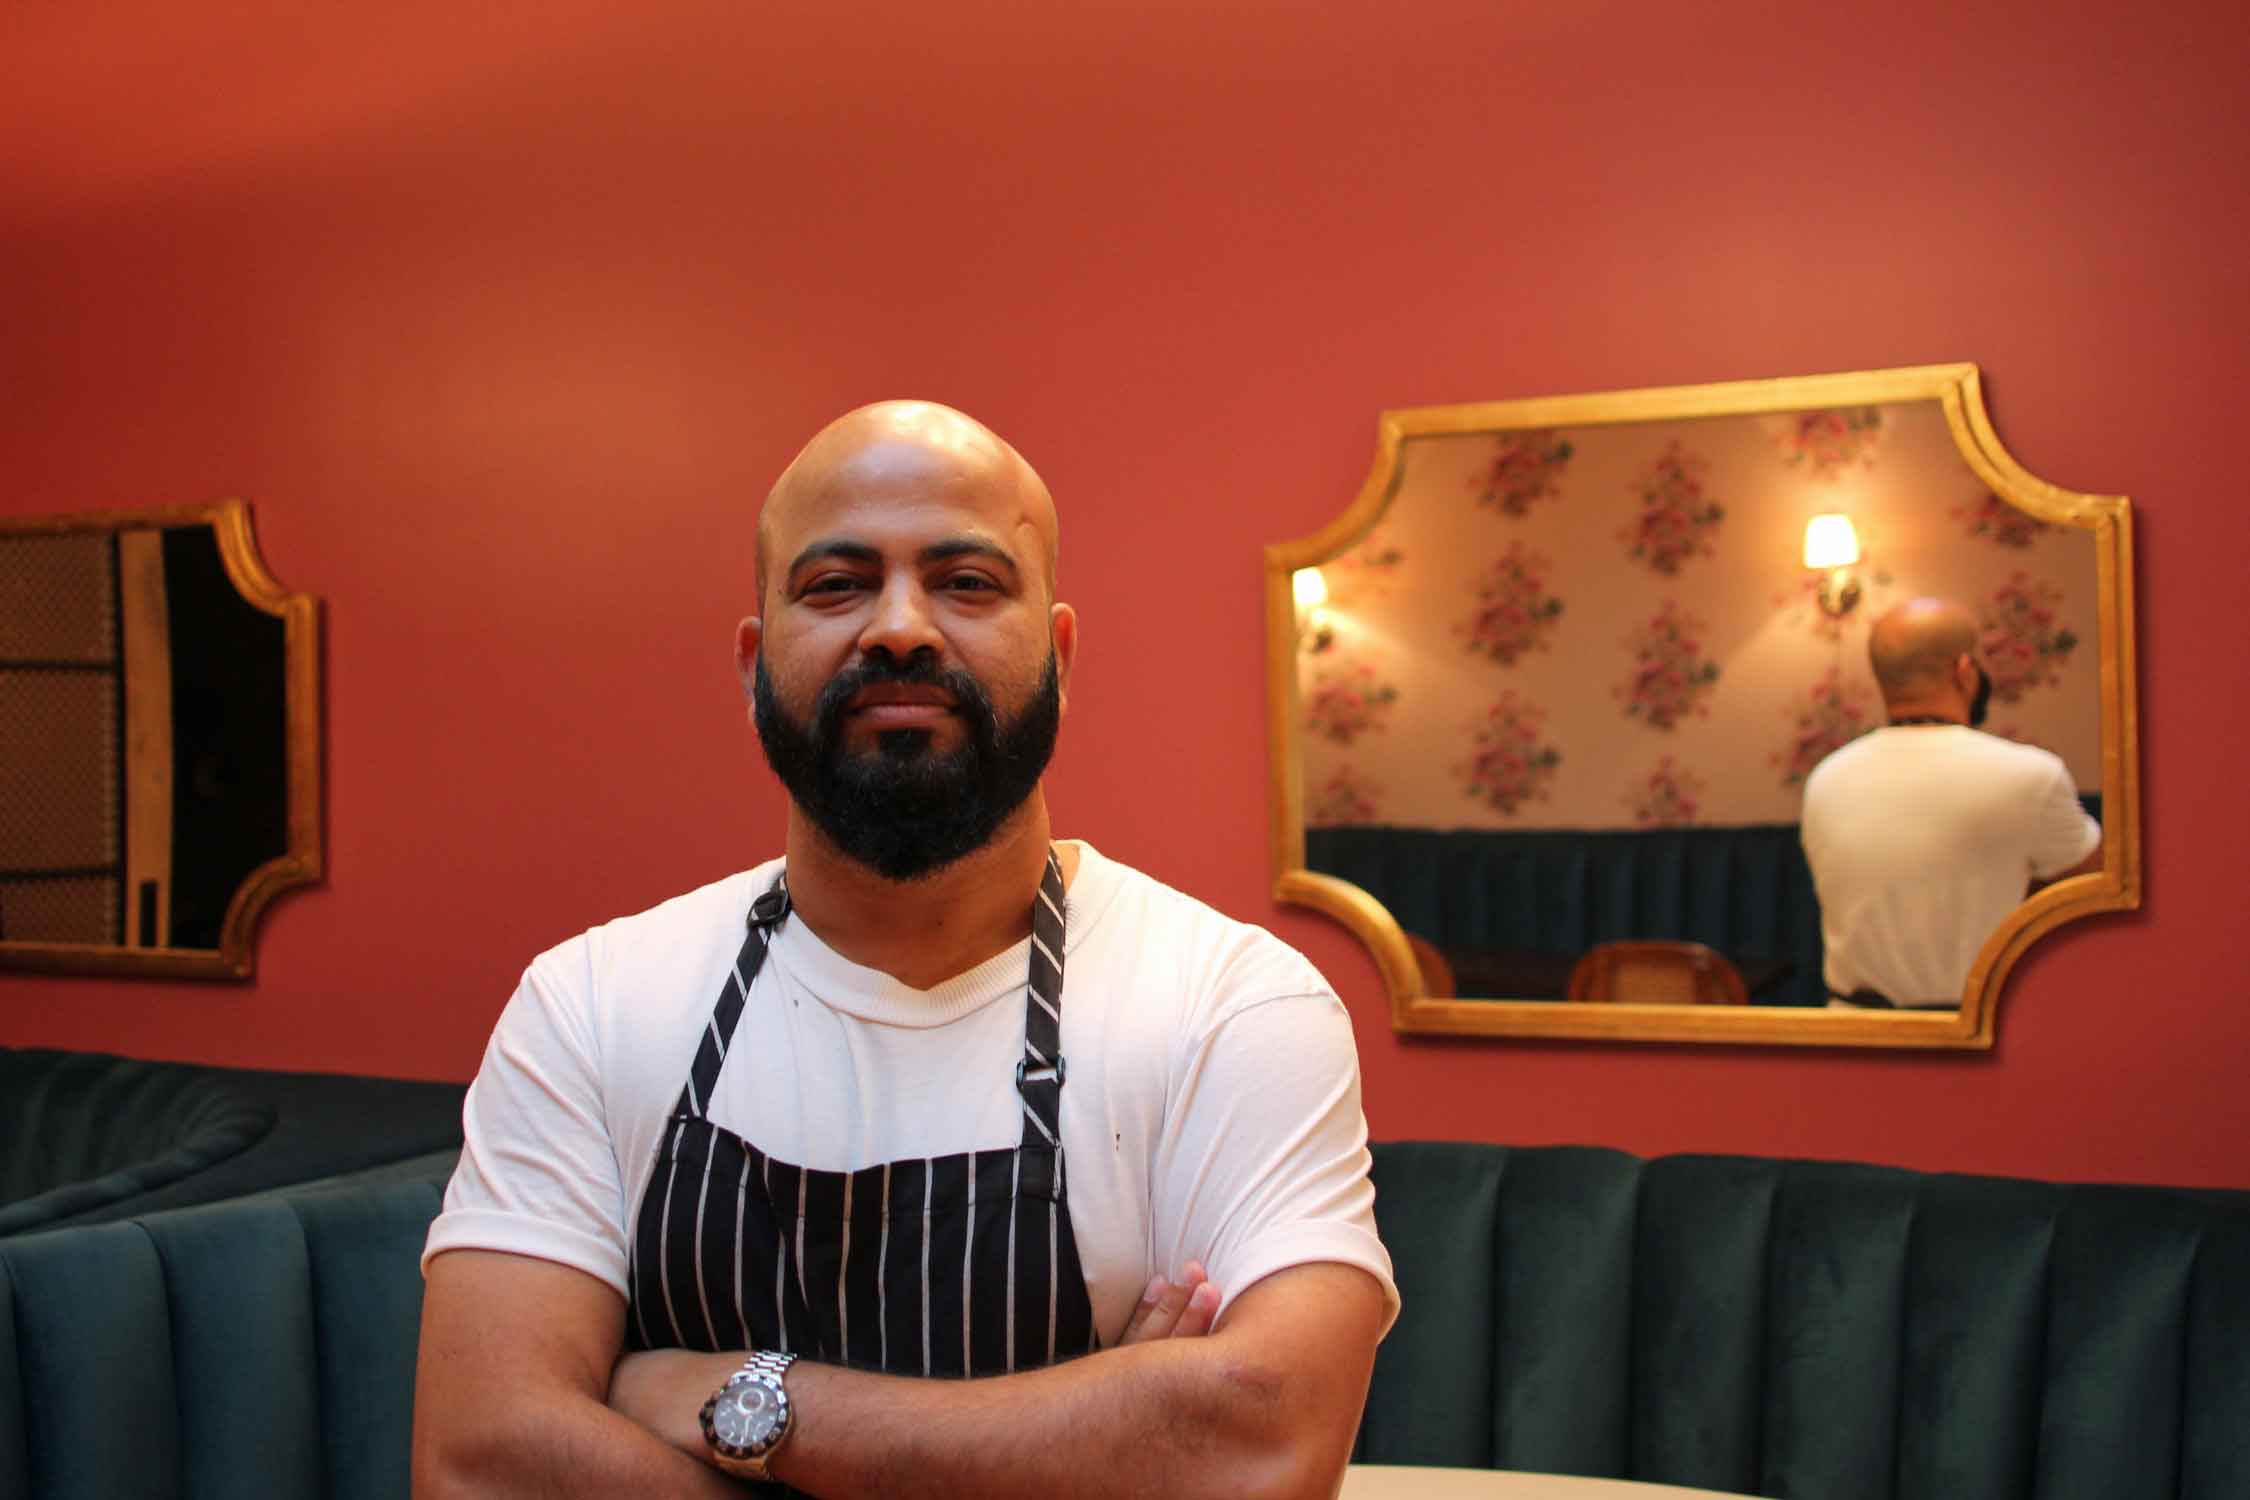 THE MOST FAMOUS INDIAN CHEF NO ONE KNOWS IN CHICAGO